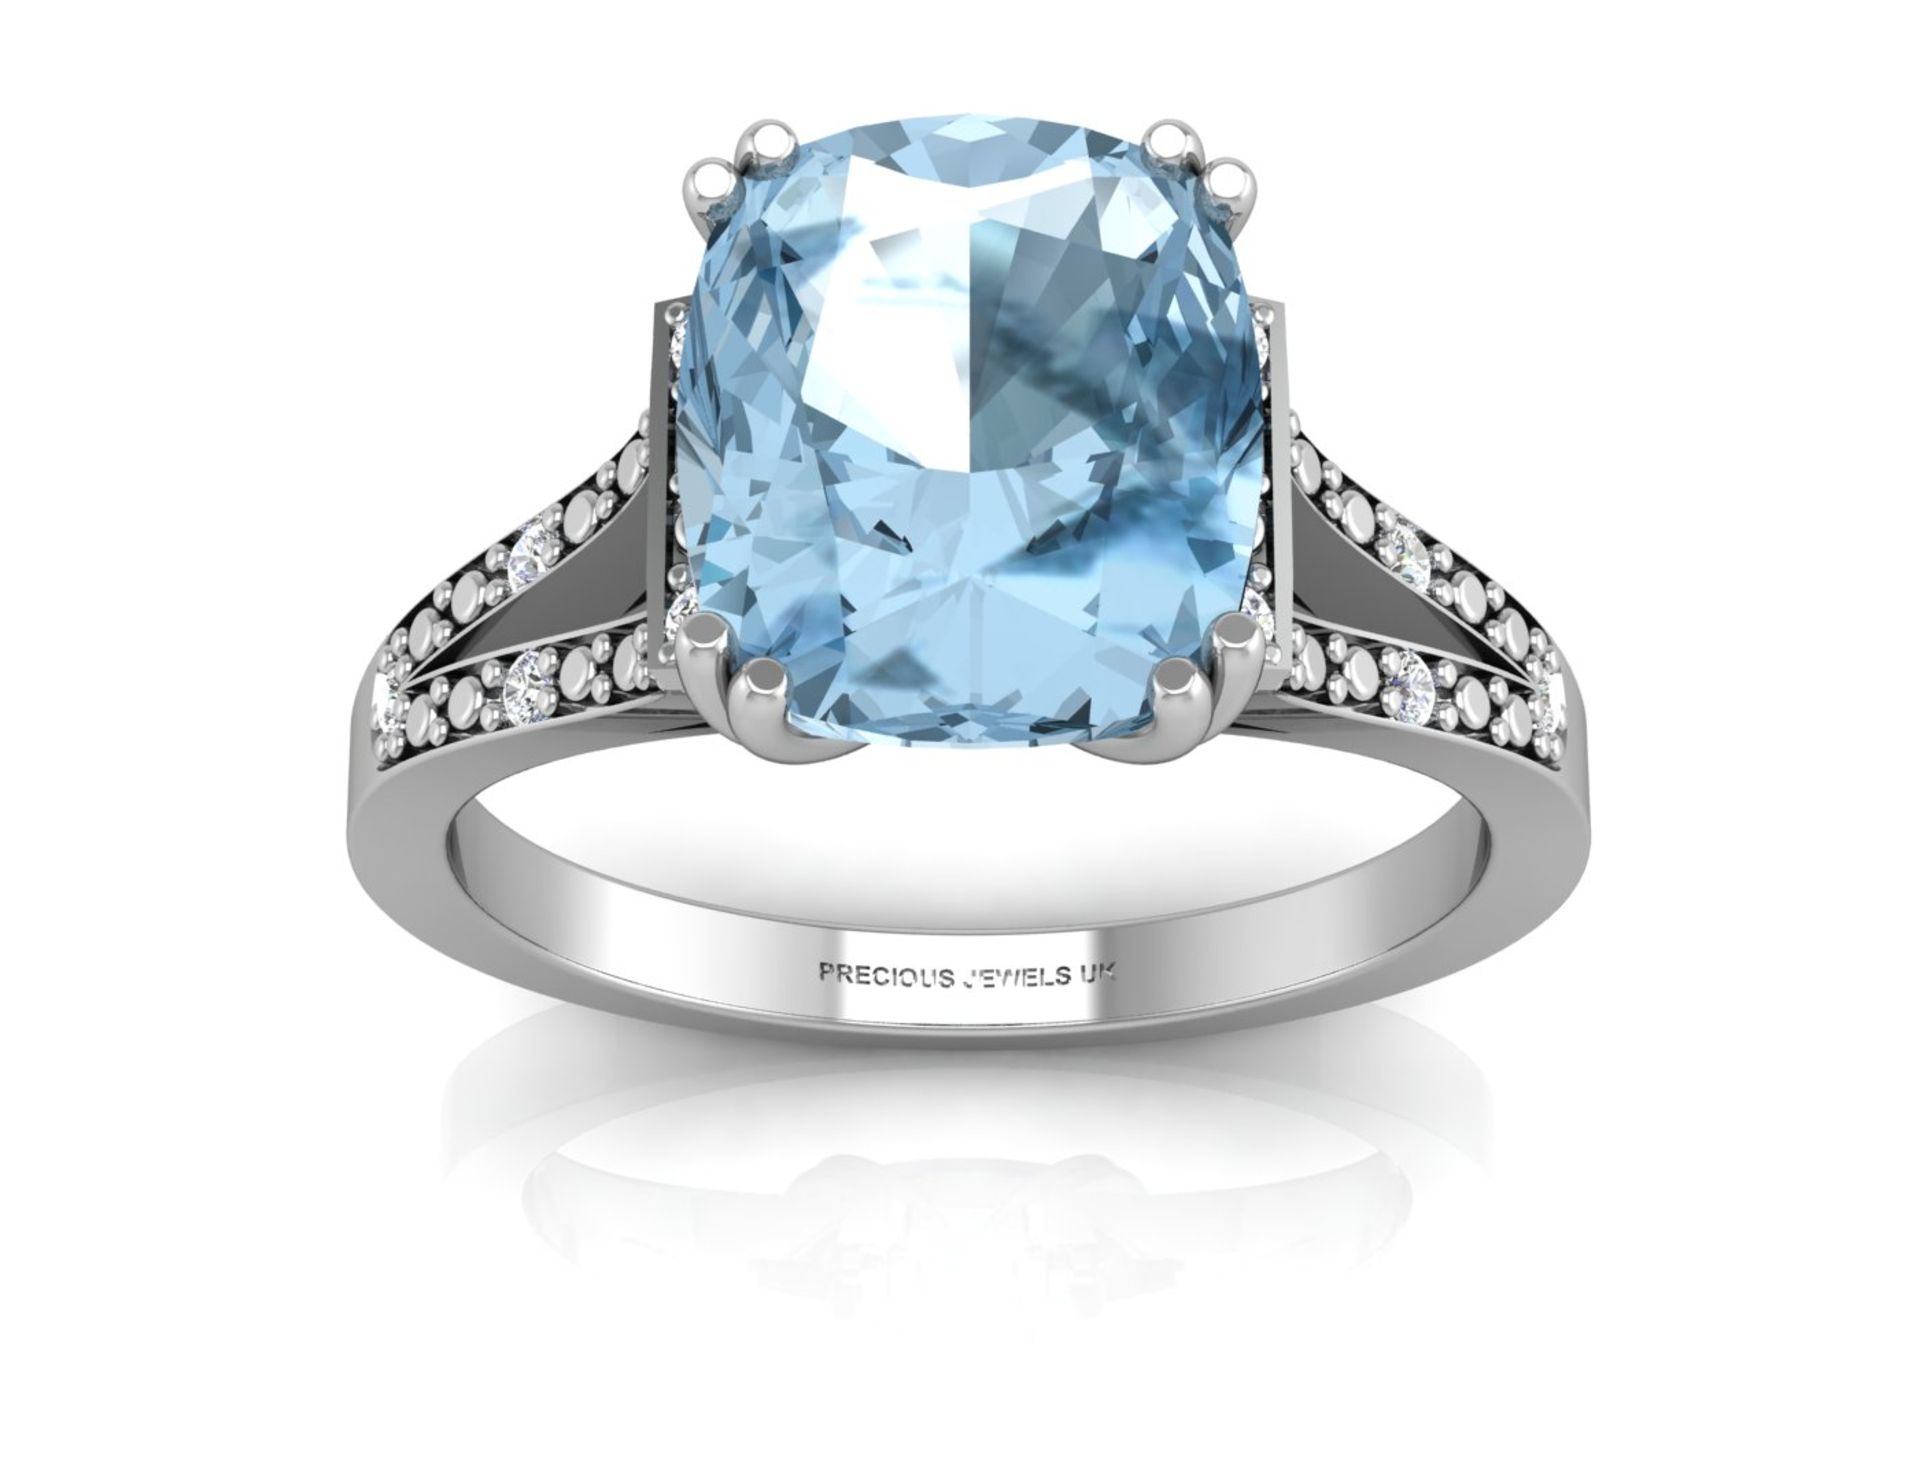 9ct White Gold Diamond And Blue Topaz Ring 0.07 Carats - Valued by AGI £1,250.00 - This stunning - Image 3 of 4